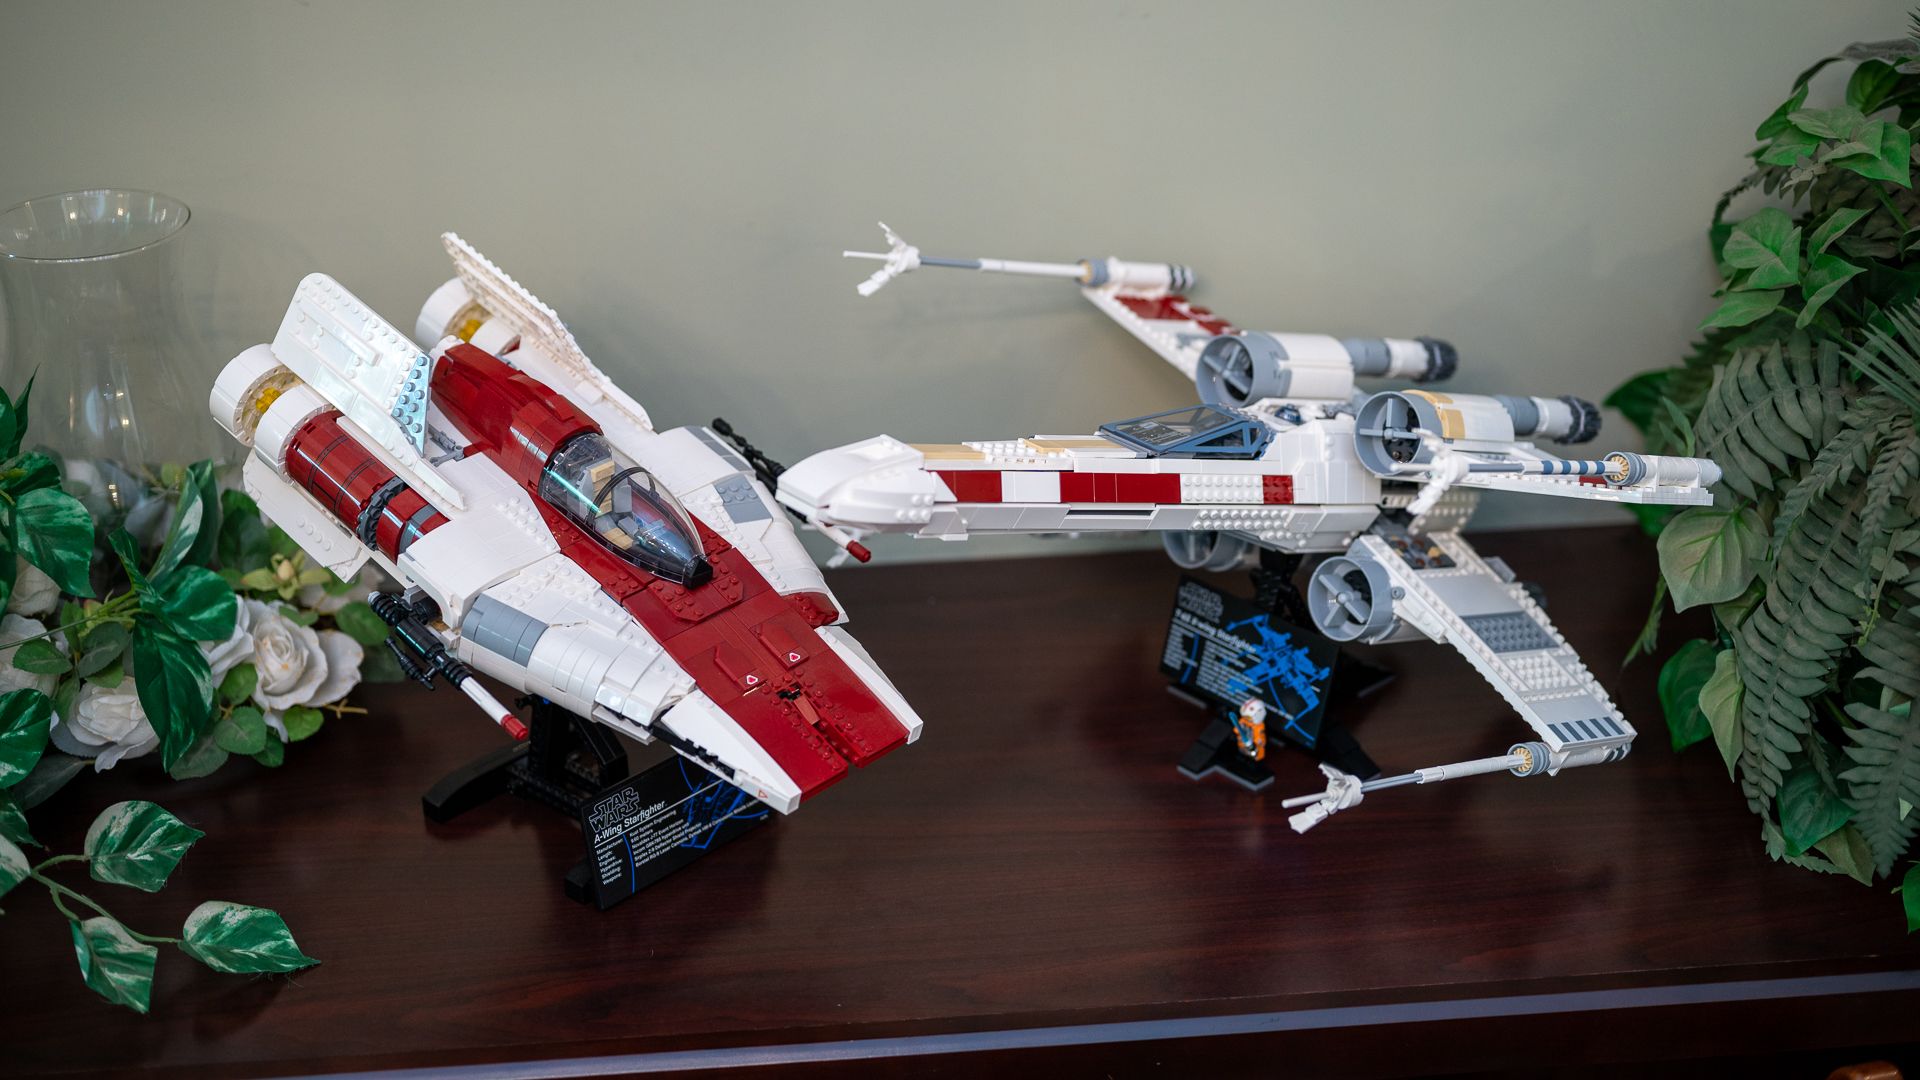 LEGO Star Wars UCS X-Wing Starfighter next to an A-Wing Starfighter